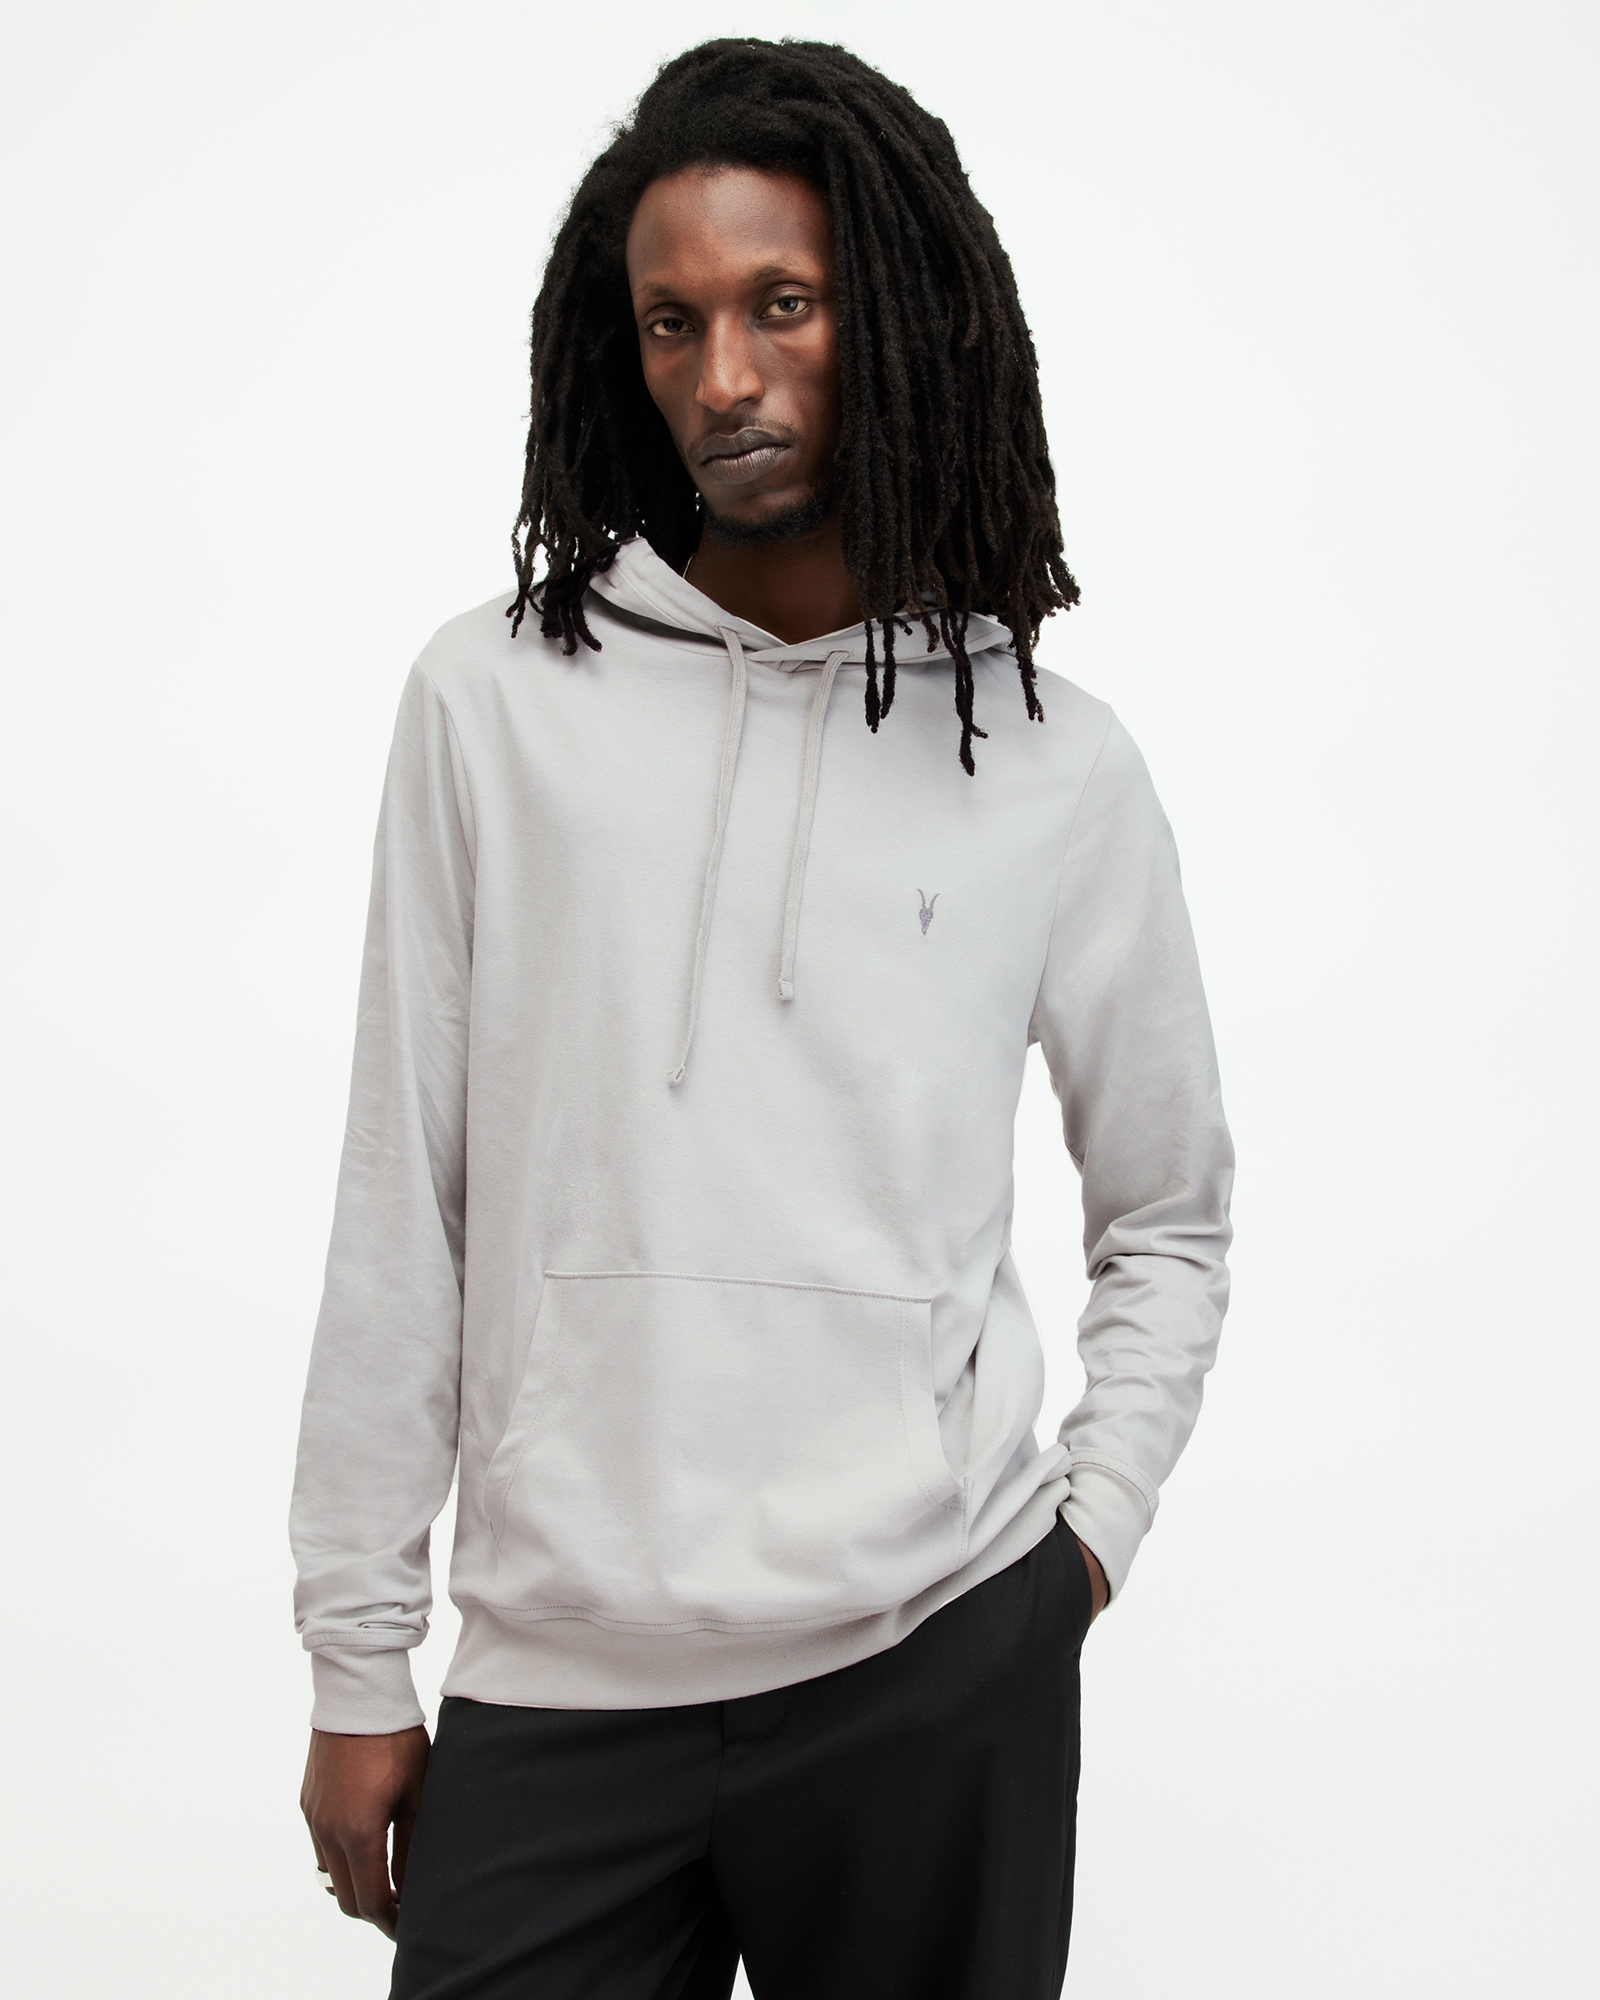 AllSaints Brace Pullover Brushed Cotton Hoodie,, COOL GREY